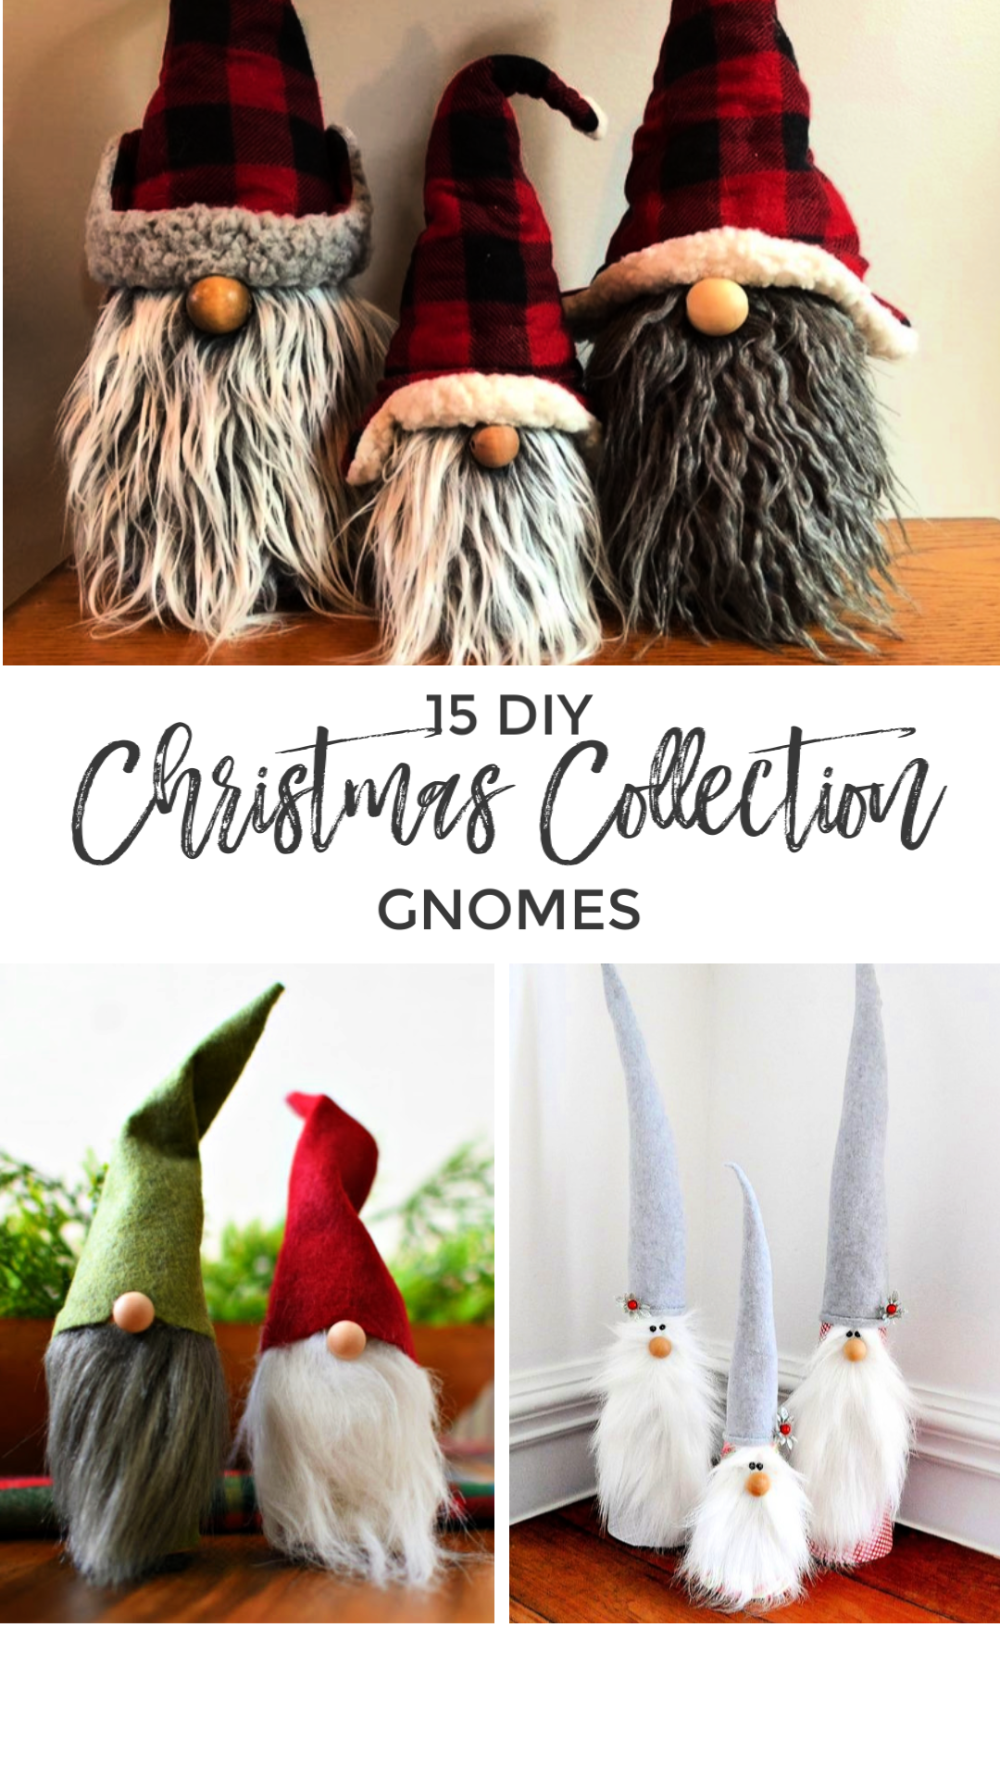 DIY Christmas Gnome Collection | Roost + Restore - DIY Christmas Gnome Collection | Roost + Restore -   18 diy Christmas Decorations sewing ideas